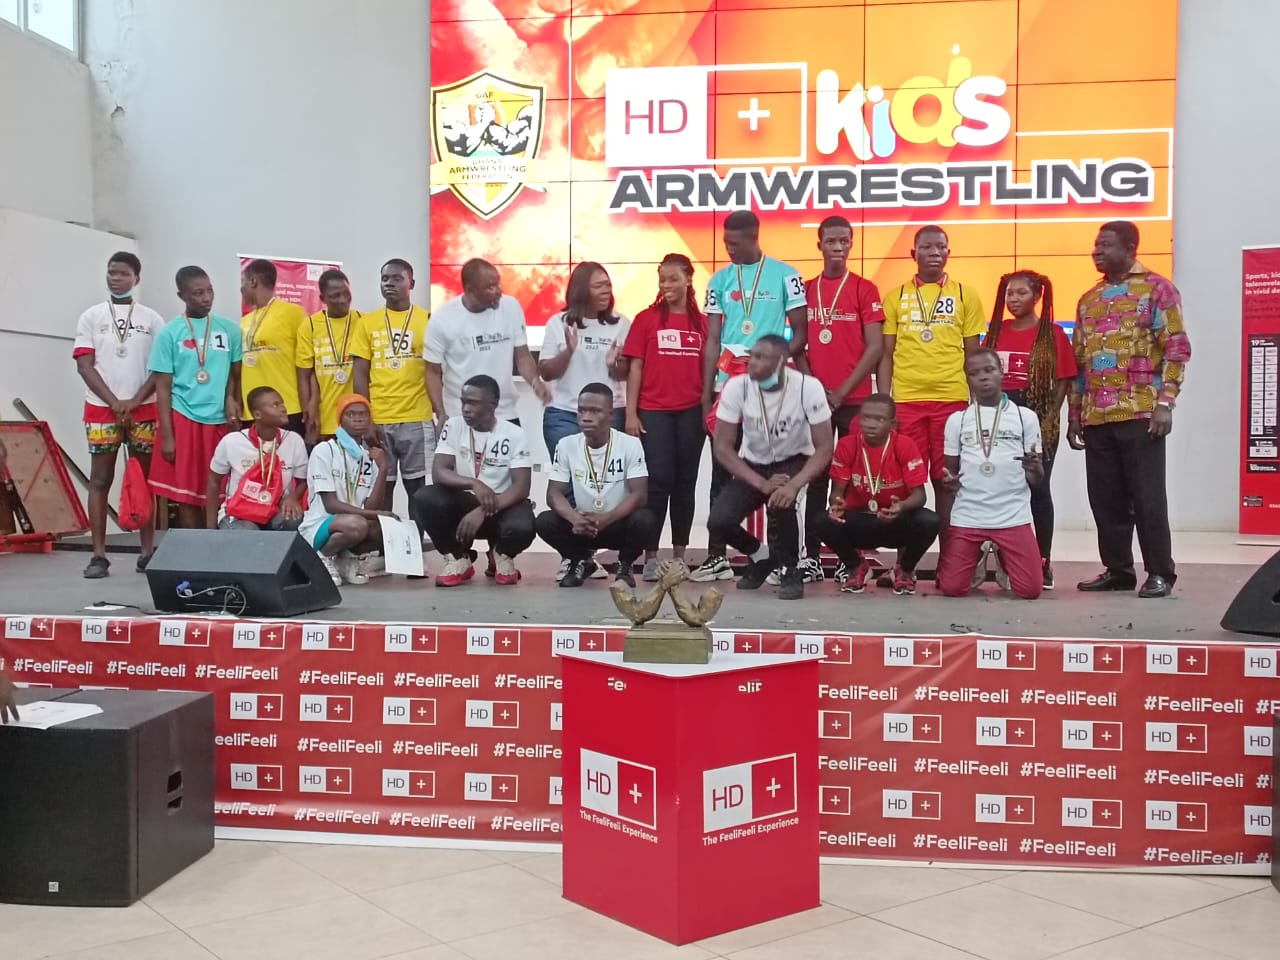 Accra: HD+ Kids Armwrestling Championship qualifier held